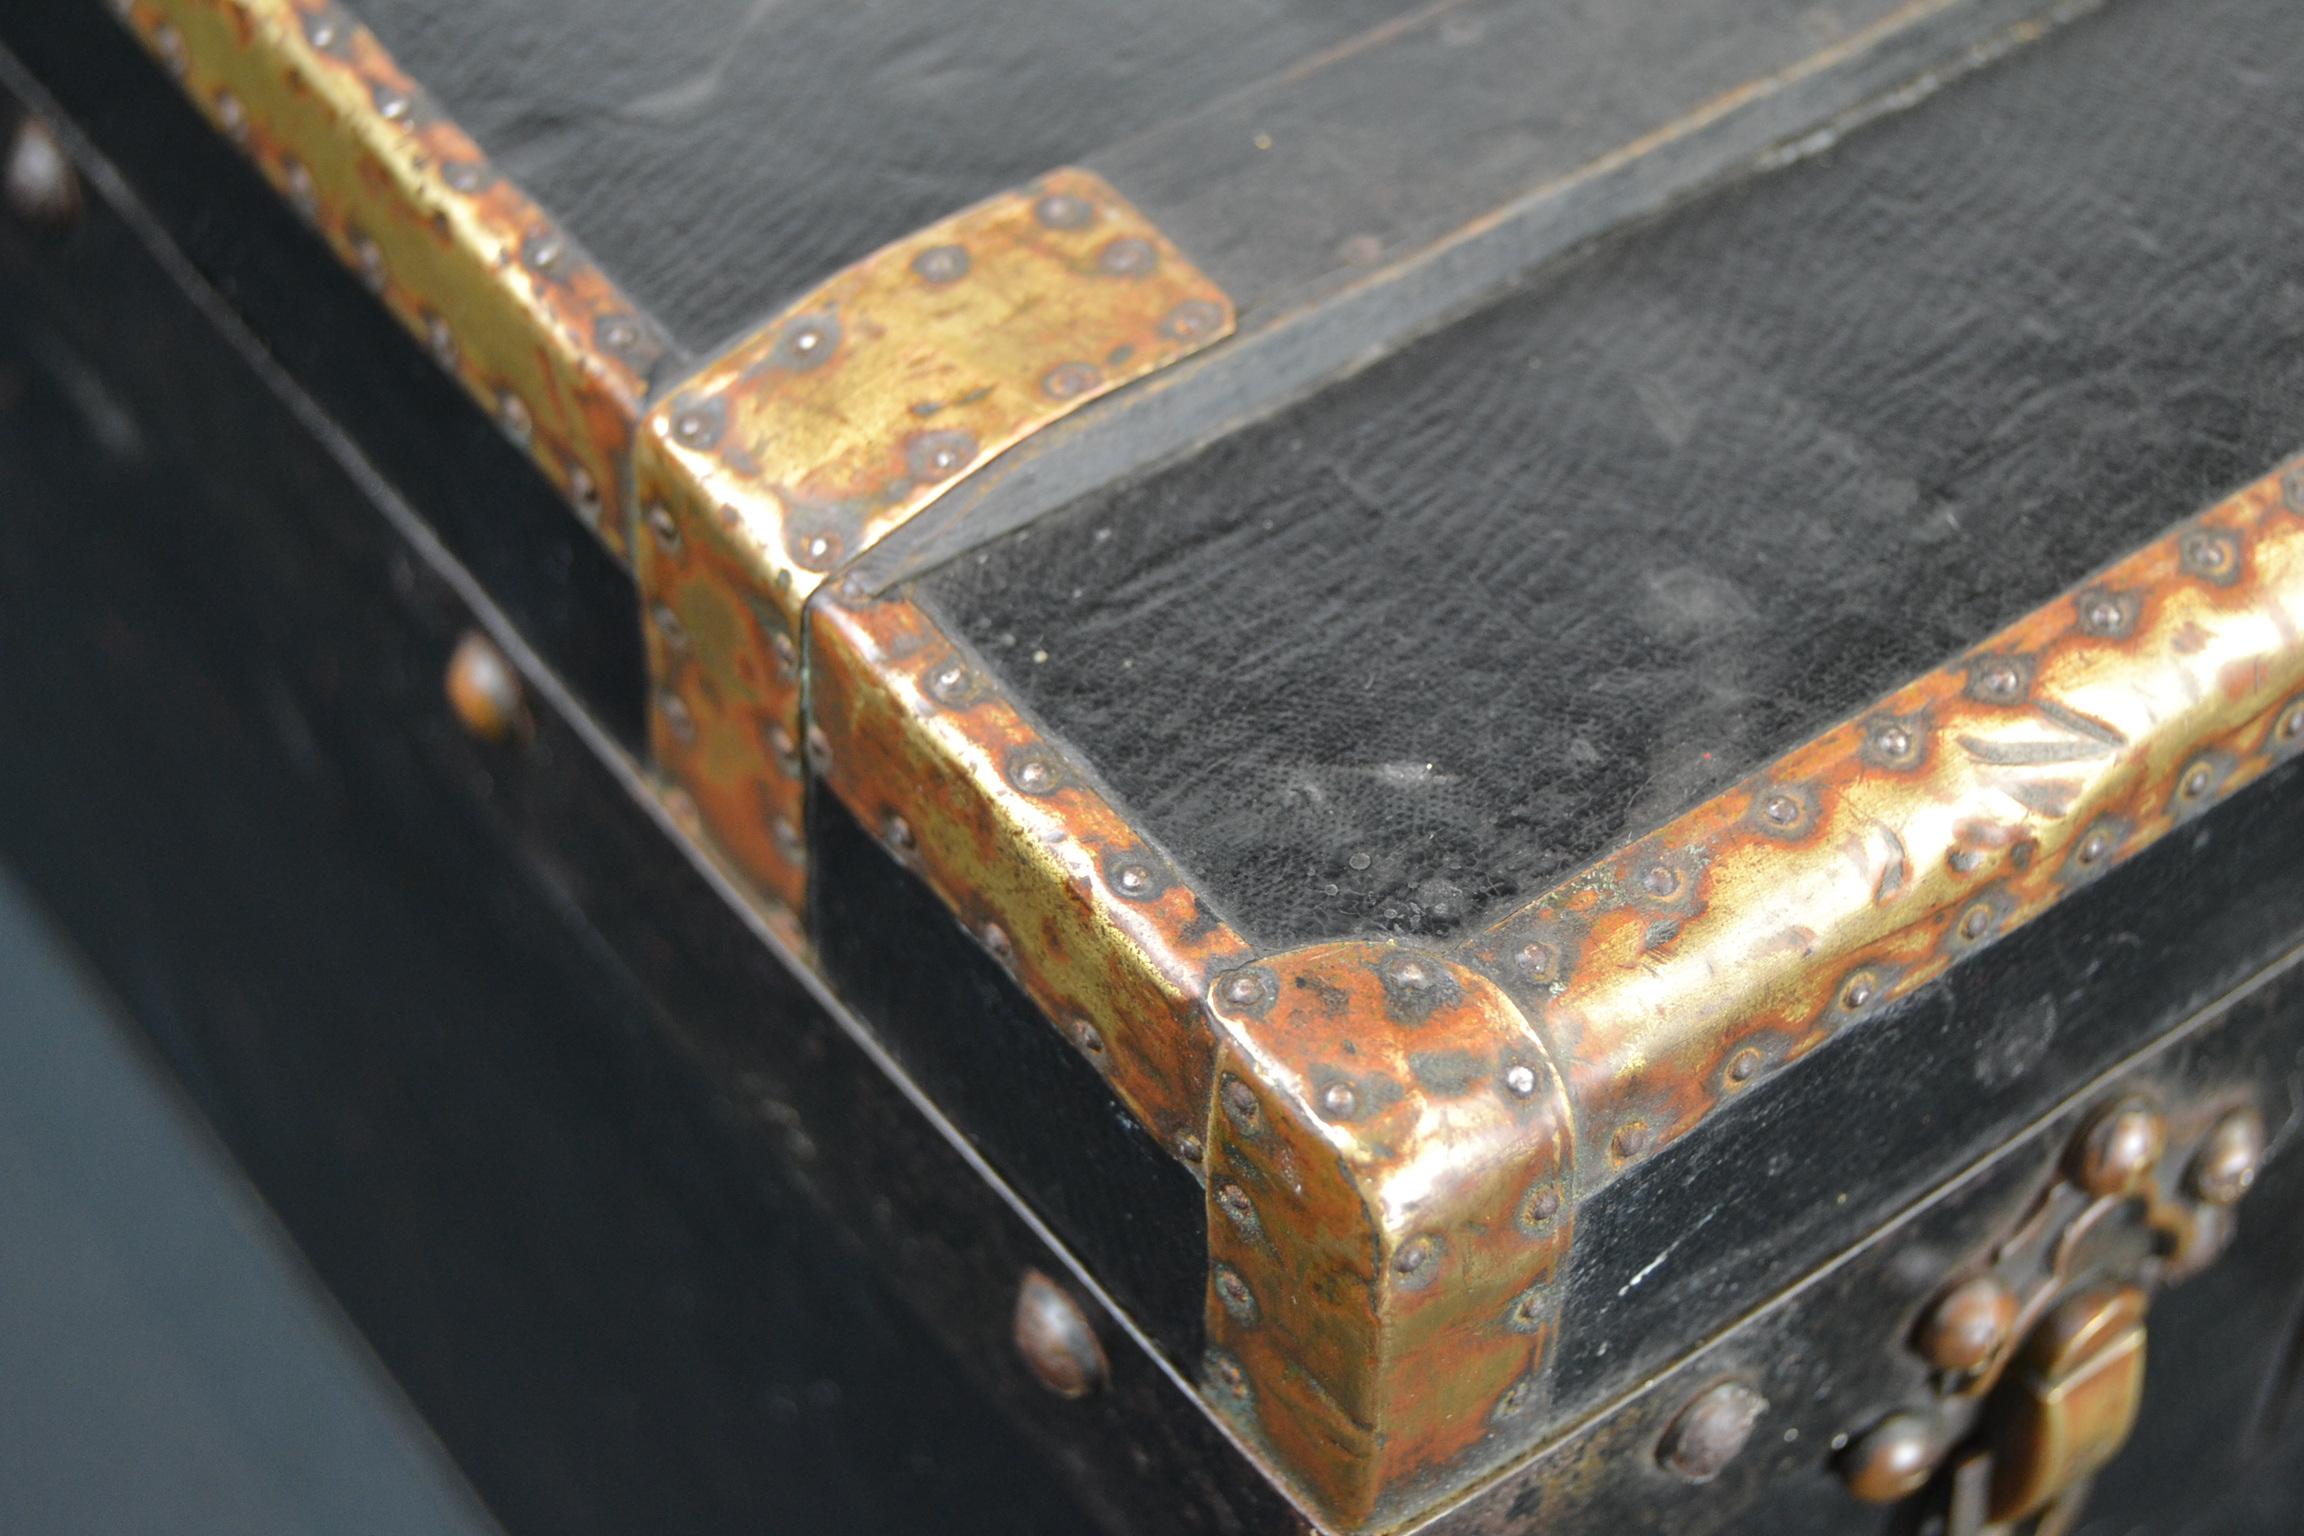 Rare and beautiful antique small Treasure trunk,
made by the well known Company Malles Au Touriste,
which was located in Paris, France, since 1847.
This antique trunk - antique chest is in the style of Louis Vuitton, Goyard, Moynat, Lavolaille.